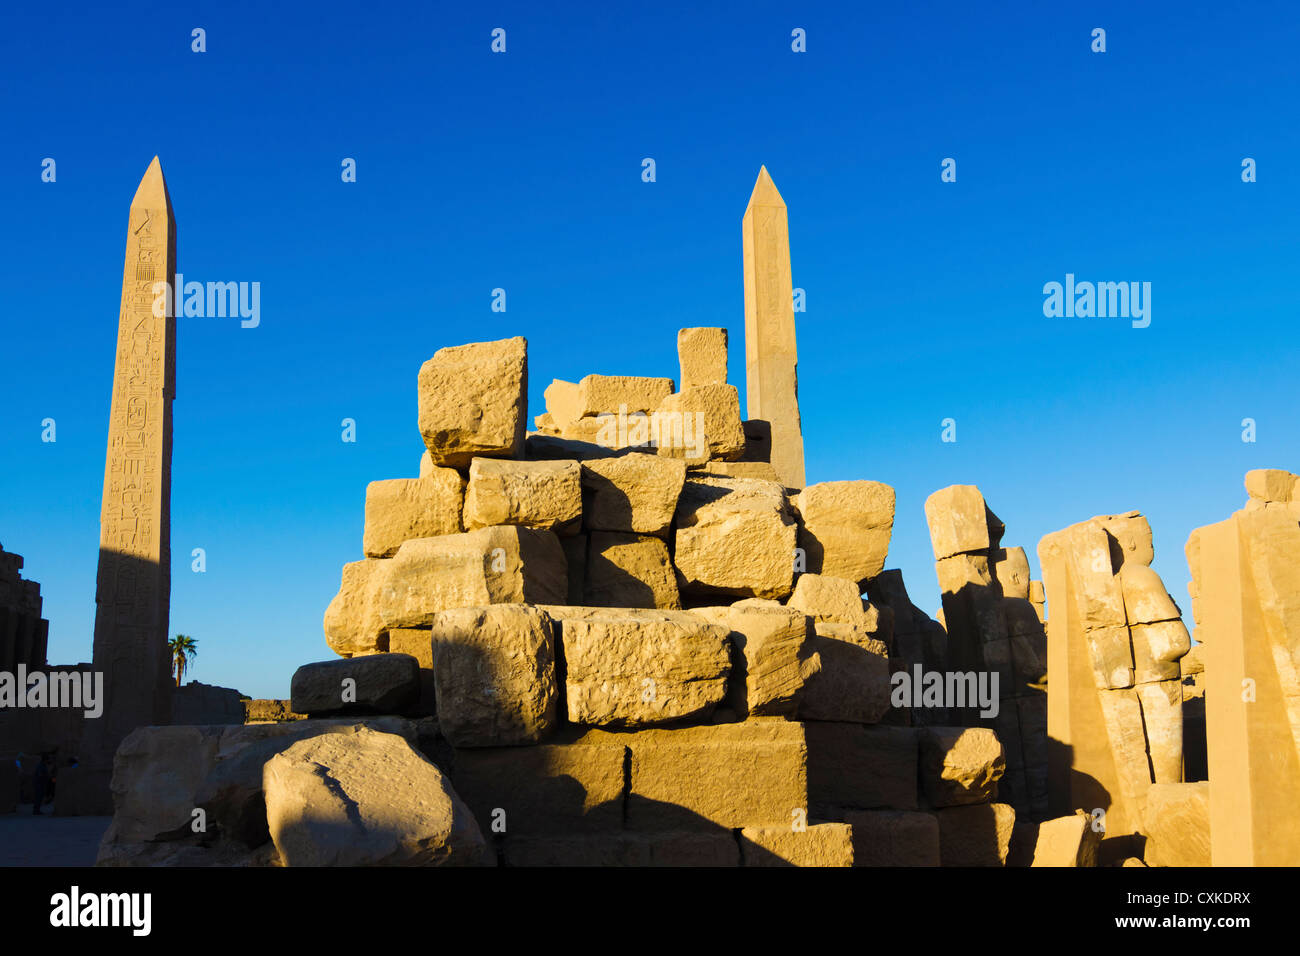 Two obelisks at the ruins of the Temple of Karnak, Luxor, Egypt Stock Photo